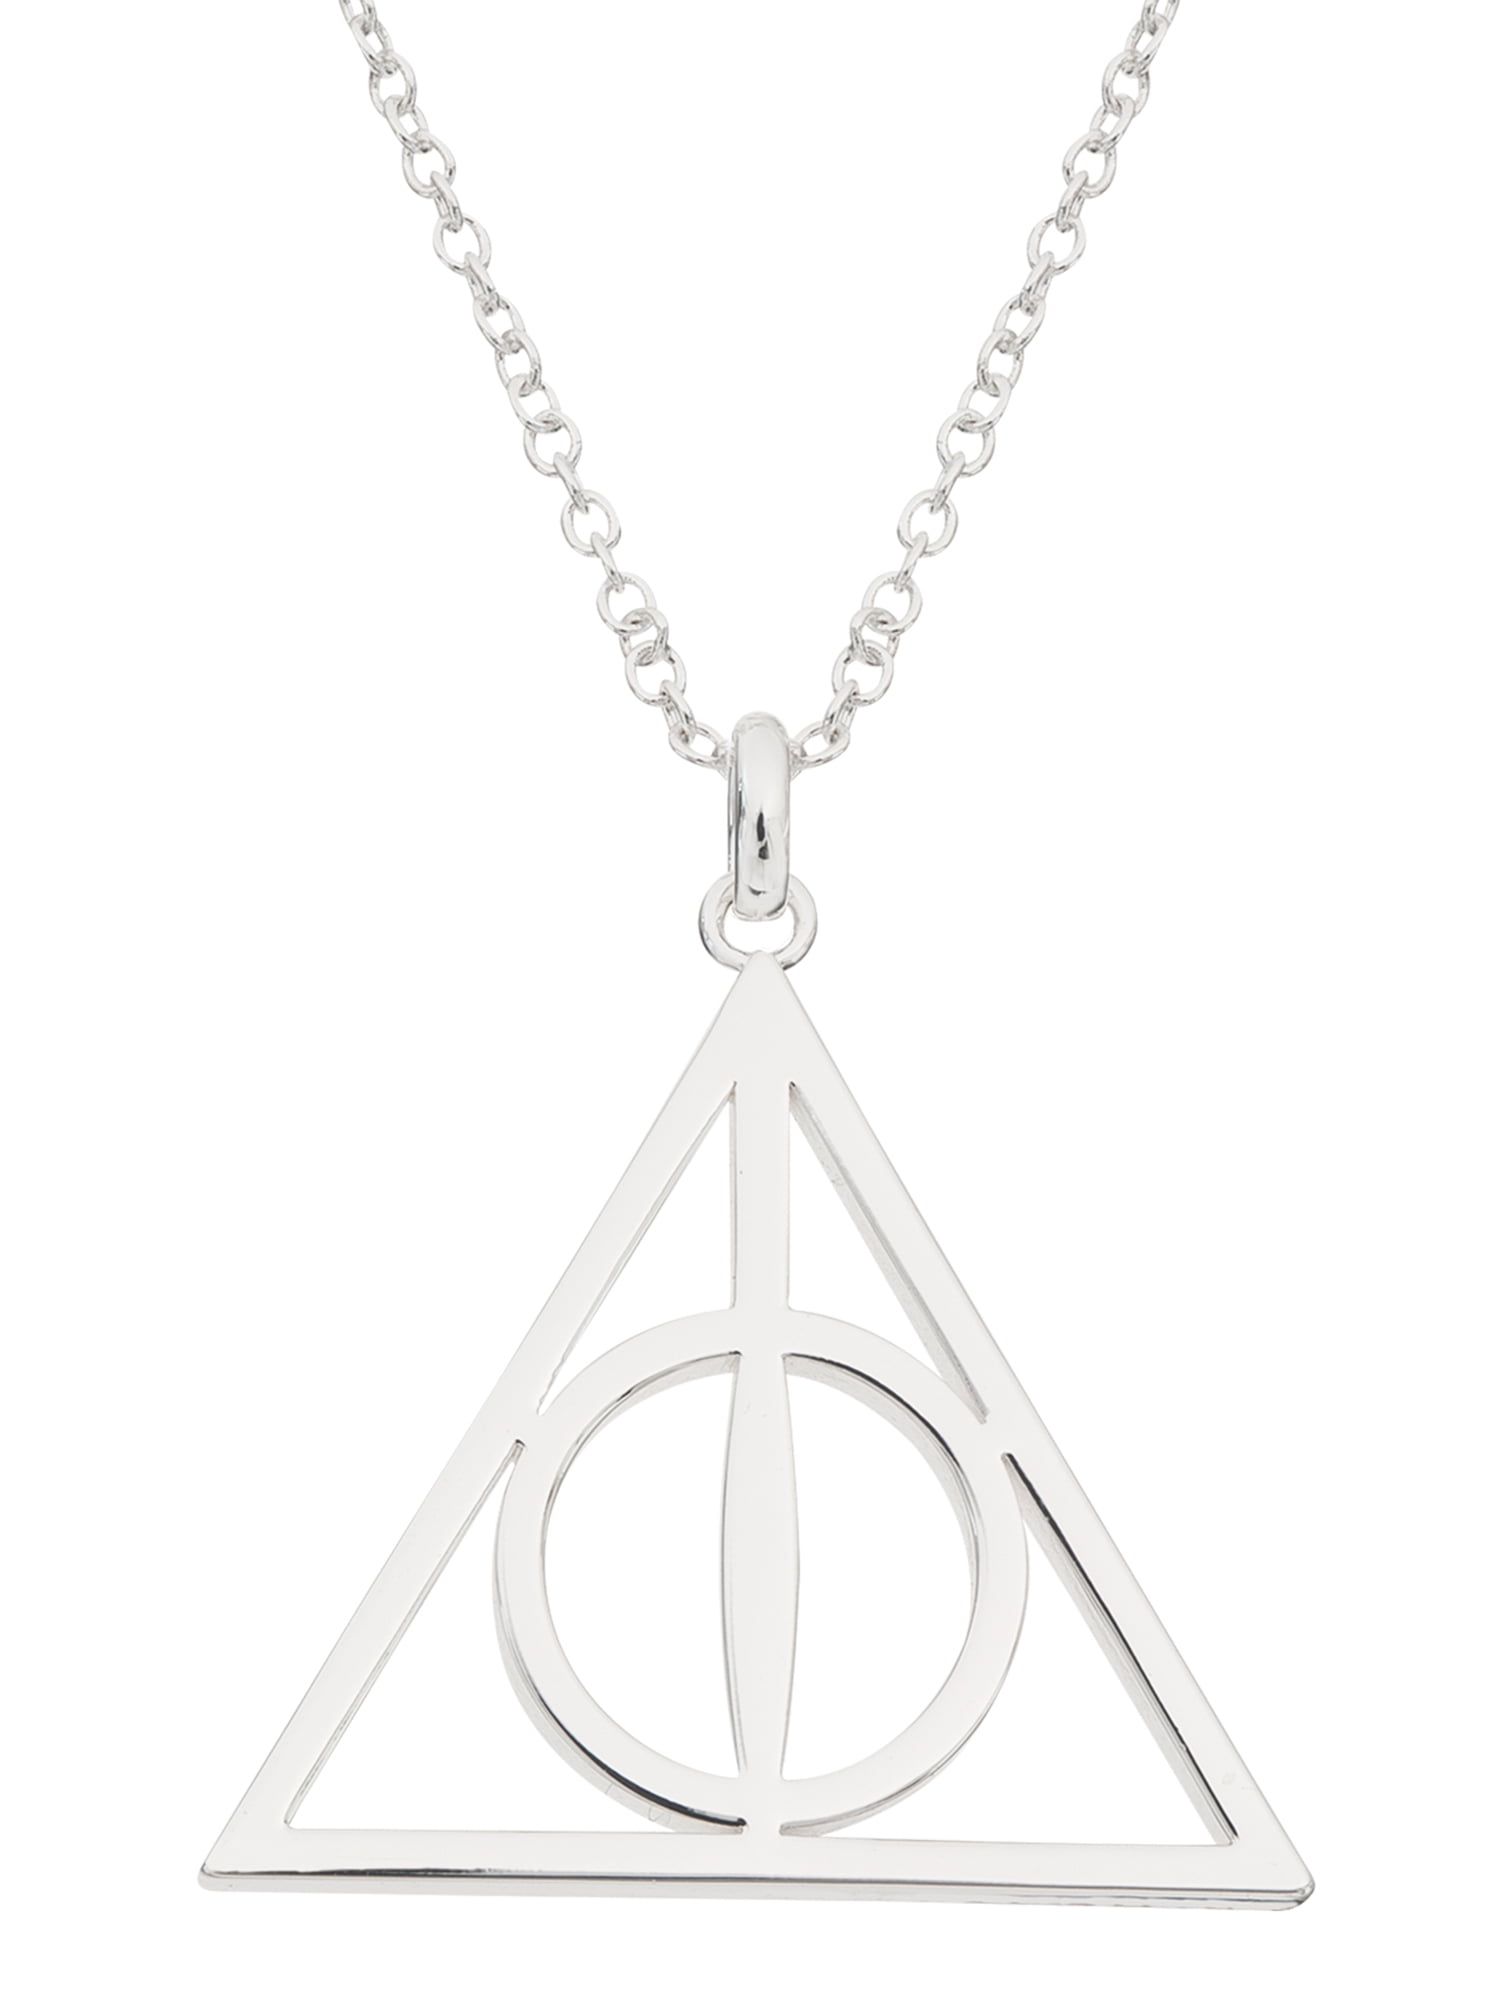 The Deathly Hallows Harry Potter Necklace pendant Stainless Steel SILVER PLATED! 